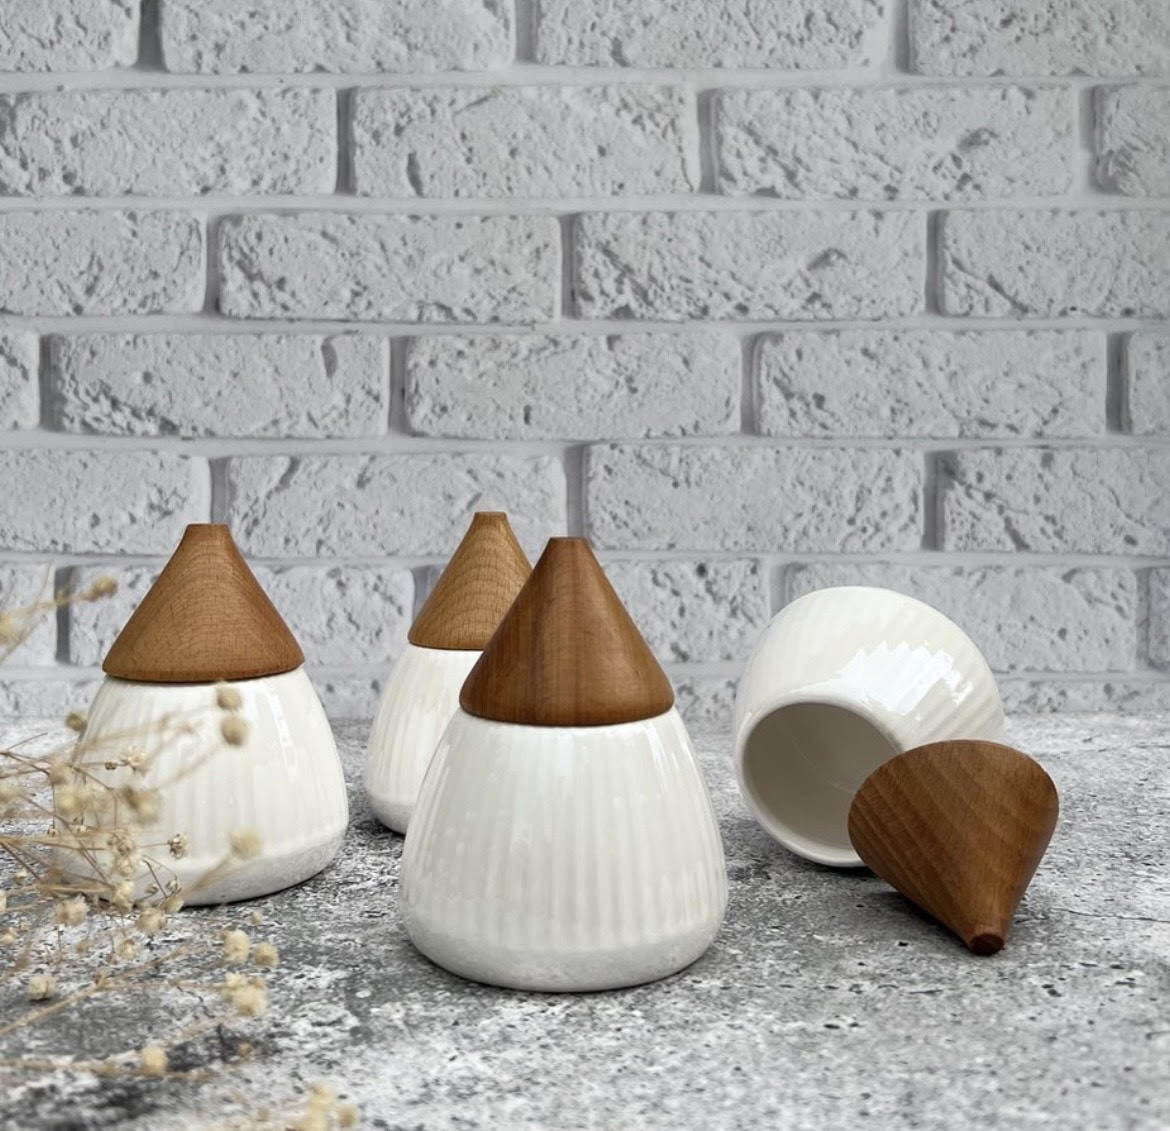 White ceramic bowls with conical shape and wooden lid.